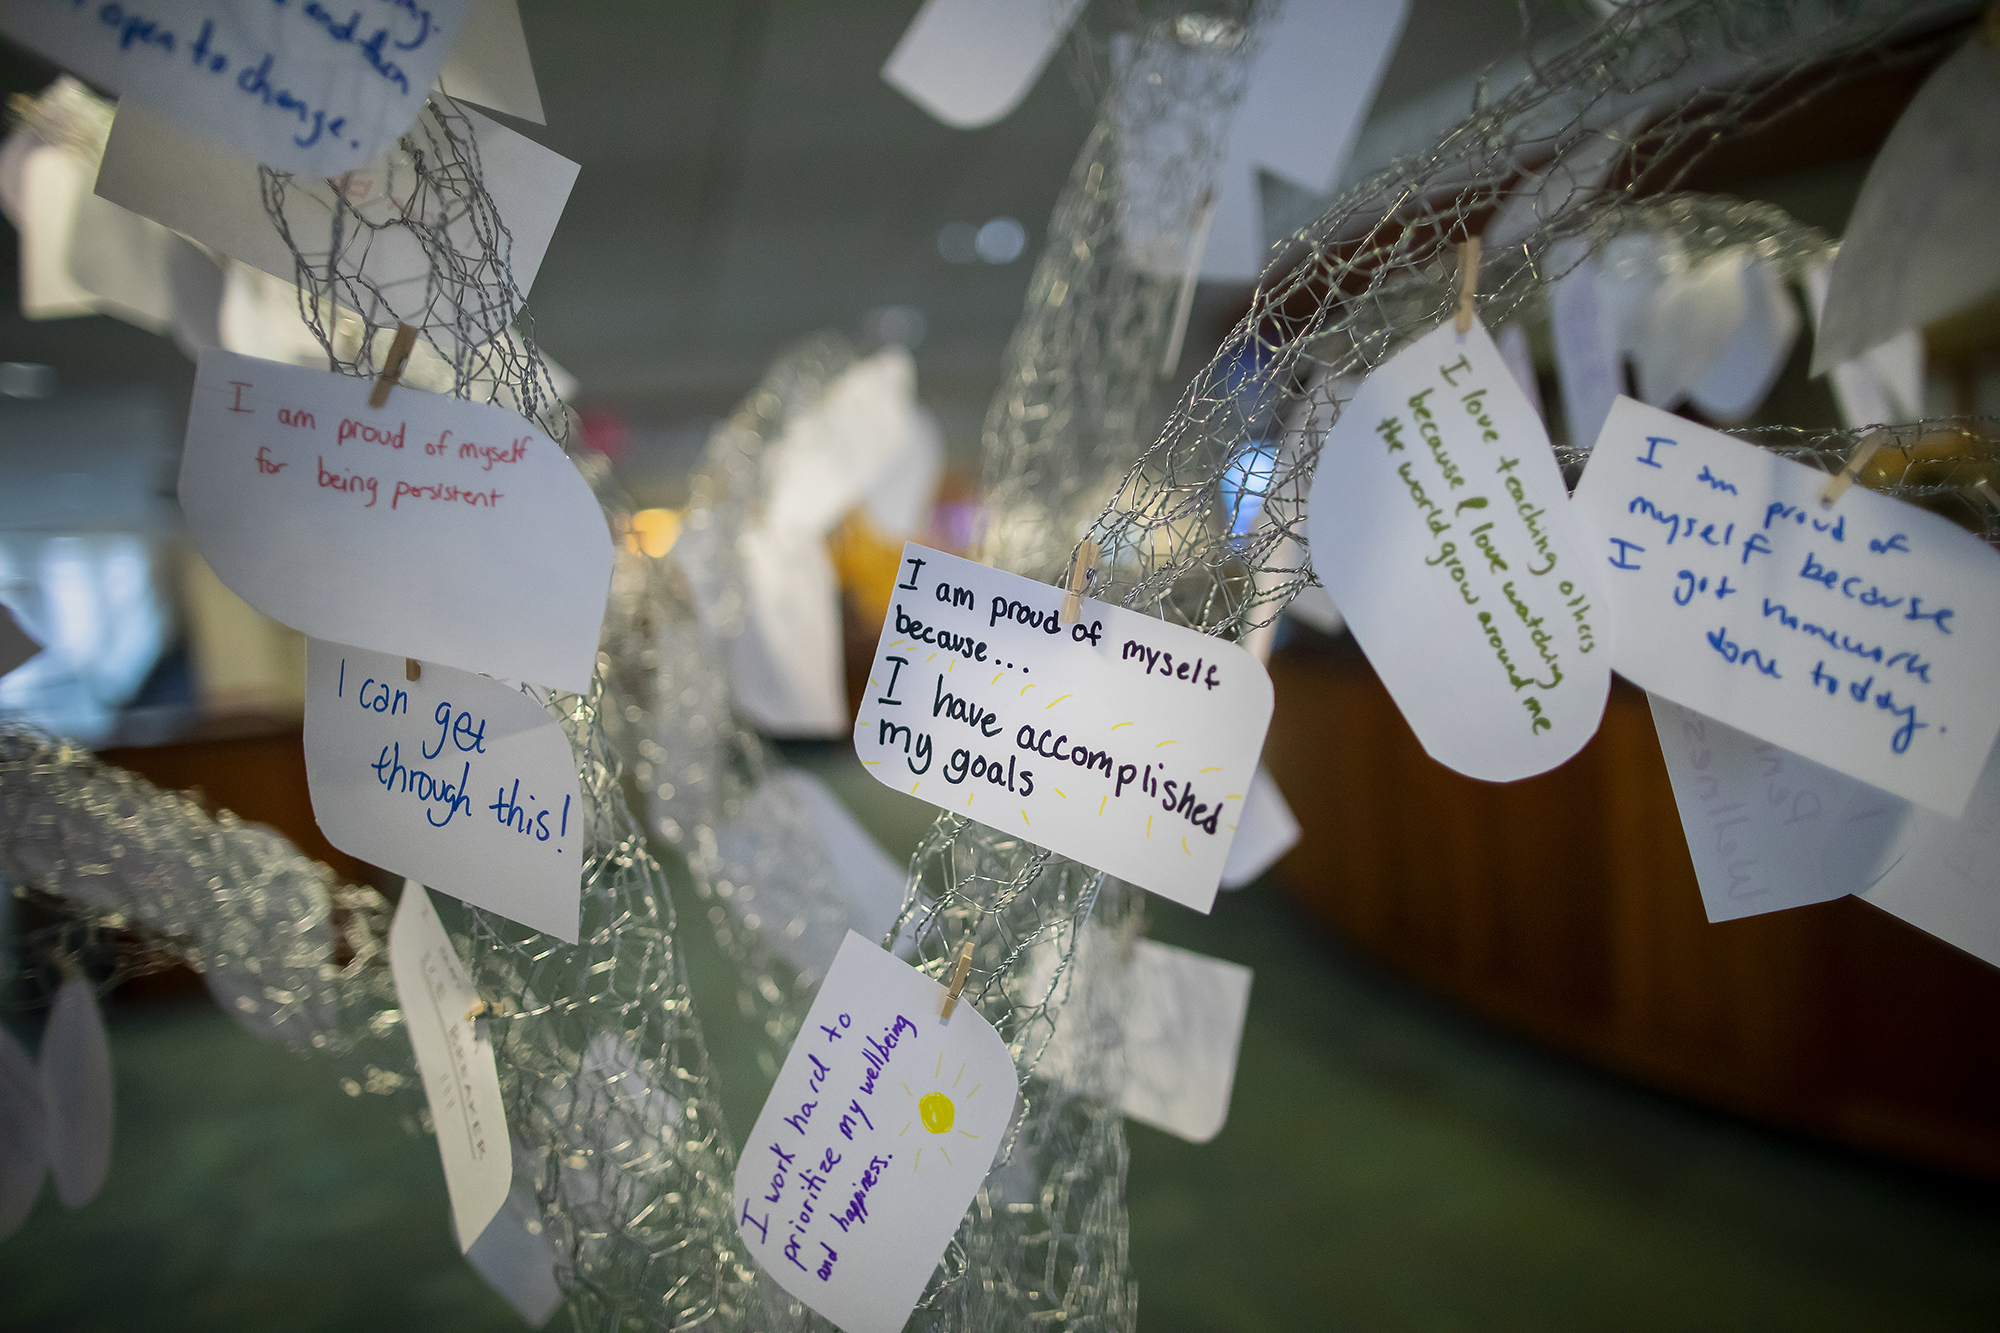 A variety of affirmation notecards hang from the tree sculpture